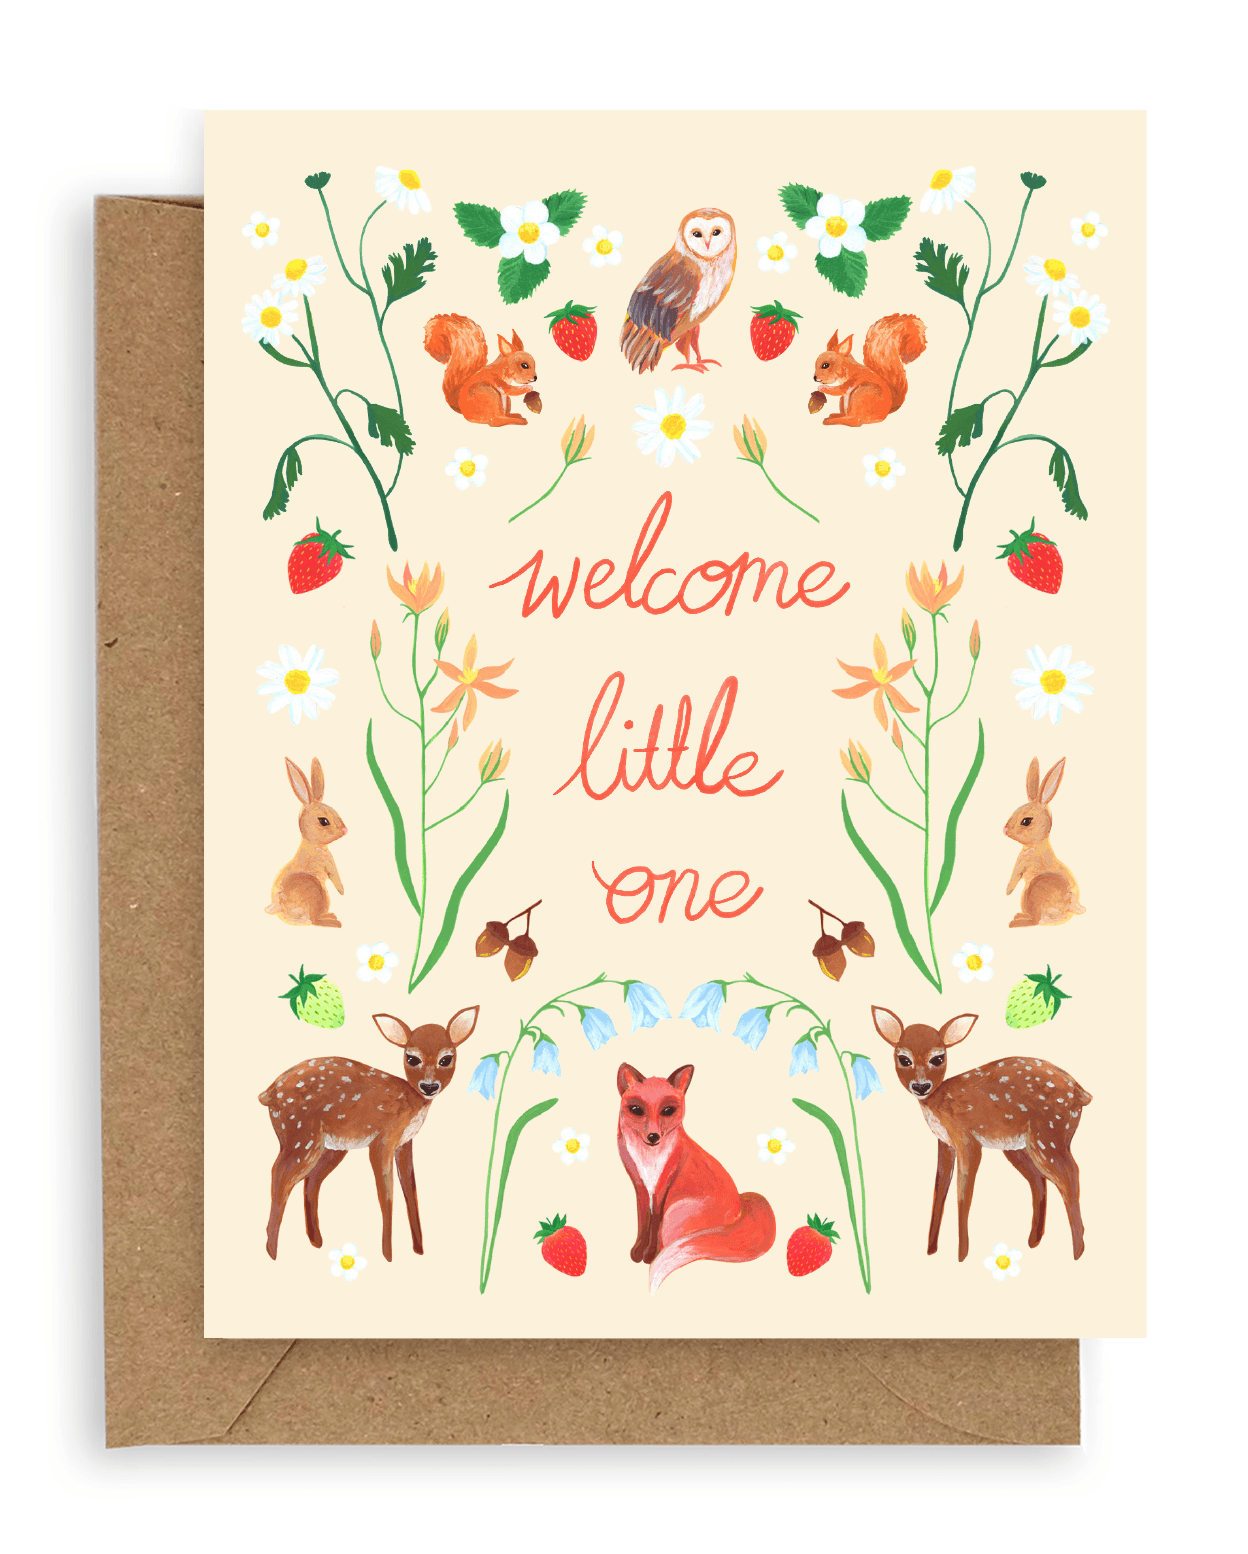 Our exciting new Holiday gift wrap features a stunning array of forest animals and flora. There are Owls, Deer, Rabbits, Squirrels, Foxes, Mushrooms, berries and various kinds of flora with orange, white, red, blue, and yellow blooms above the words "welcome little one" in red font printed on a cream background. Shown with kraft envelope.